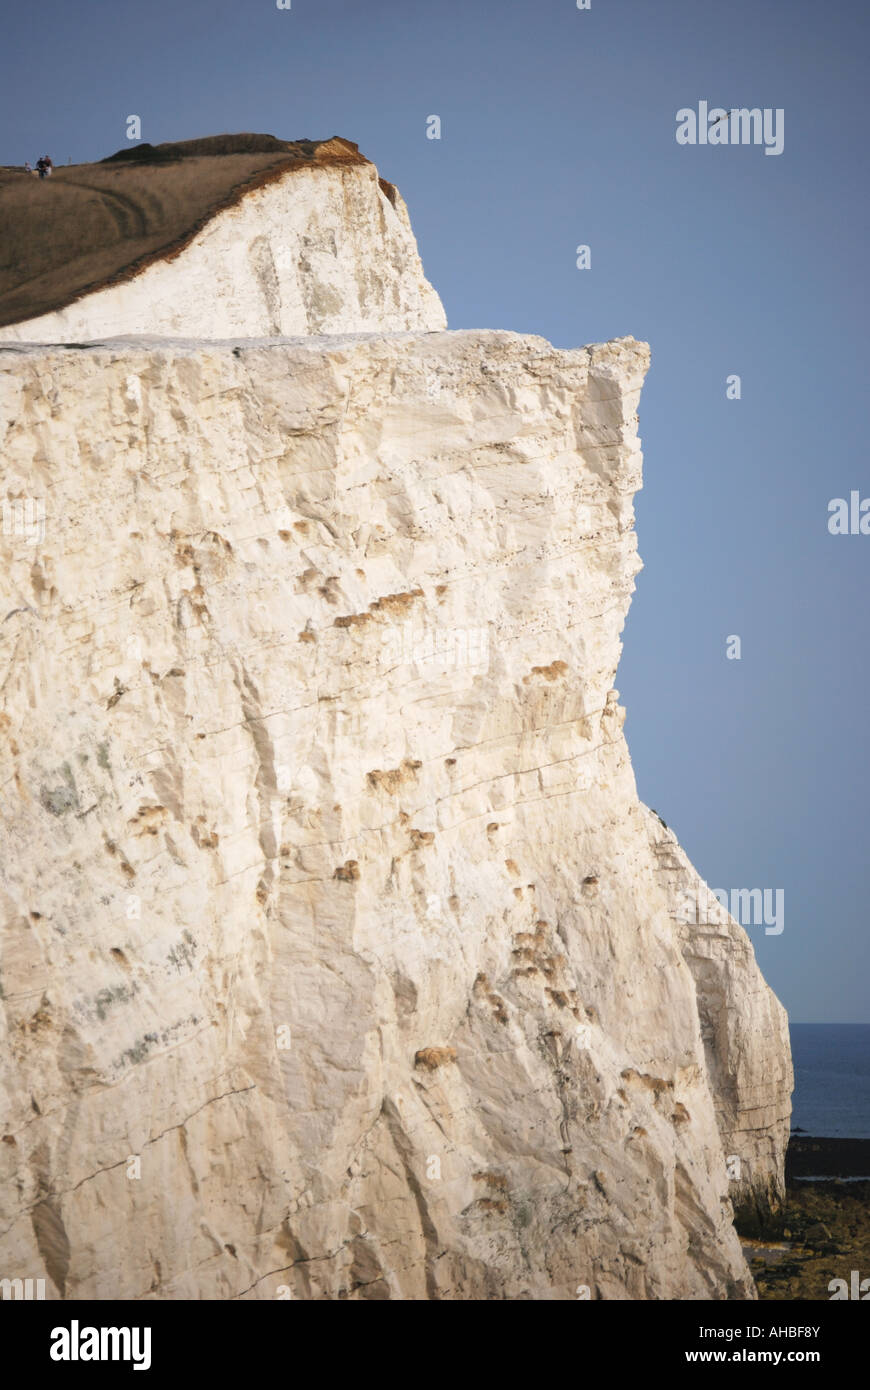 Beachy Head de Seaford, Jalhay, East Sussex, Angleterre, Royaume-Uni Banque D'Images